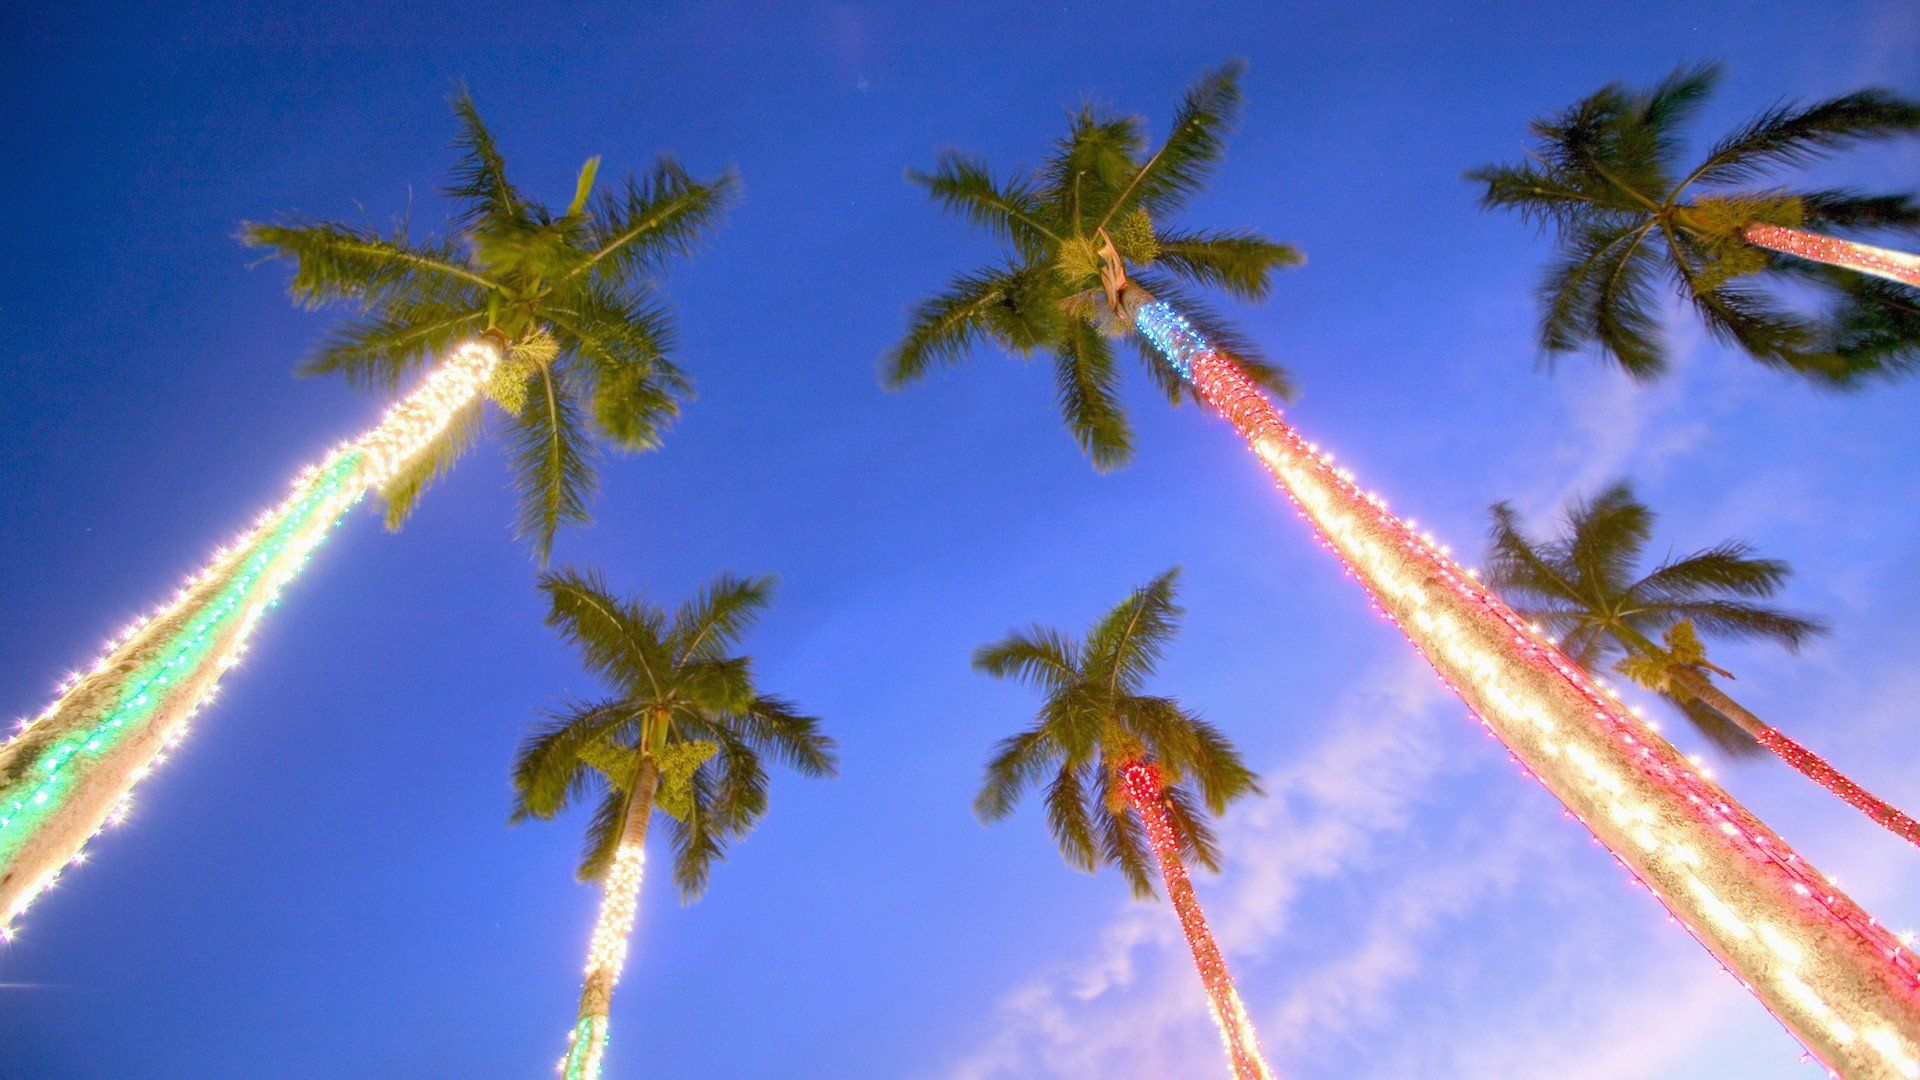 1920x1080 Tropical Christmas Wallpapers Top Free Tropical Christmas Backgrounds